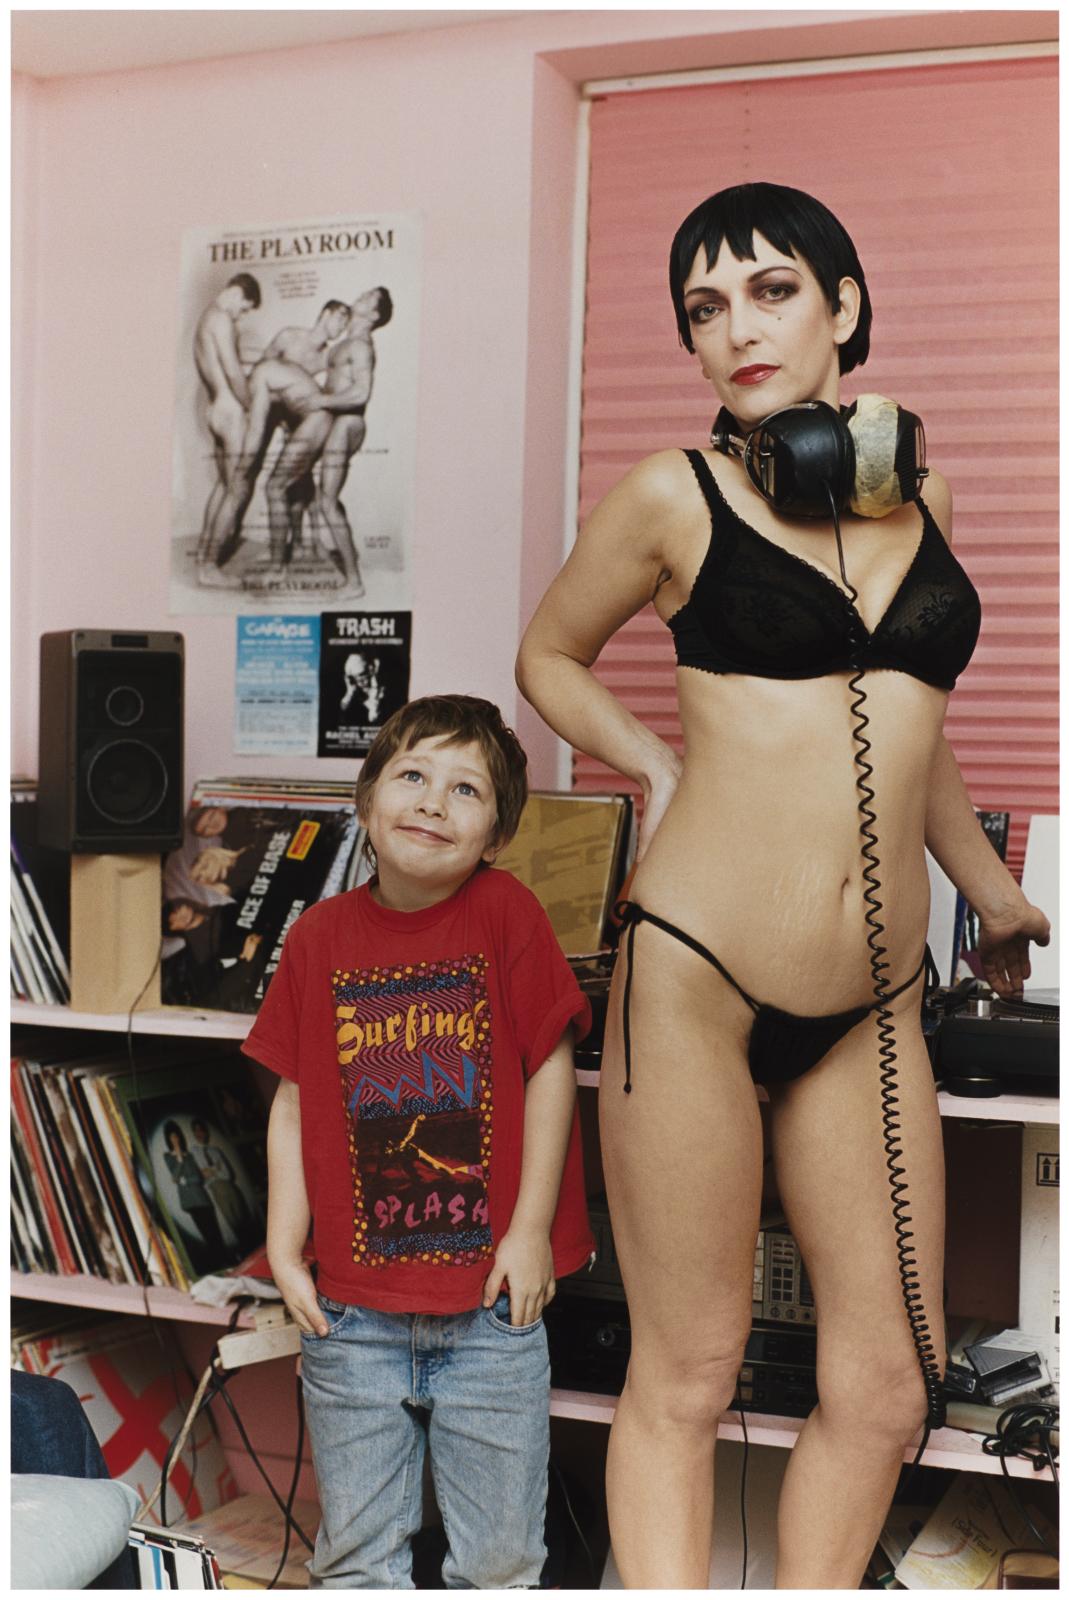 An adult wearing large headphones and black lingerie stands confidently next to a smiling child in a t-shirt and jeans. The pink wall behind them features a shelf of records and audio equipment, and a poster of nude male figures.